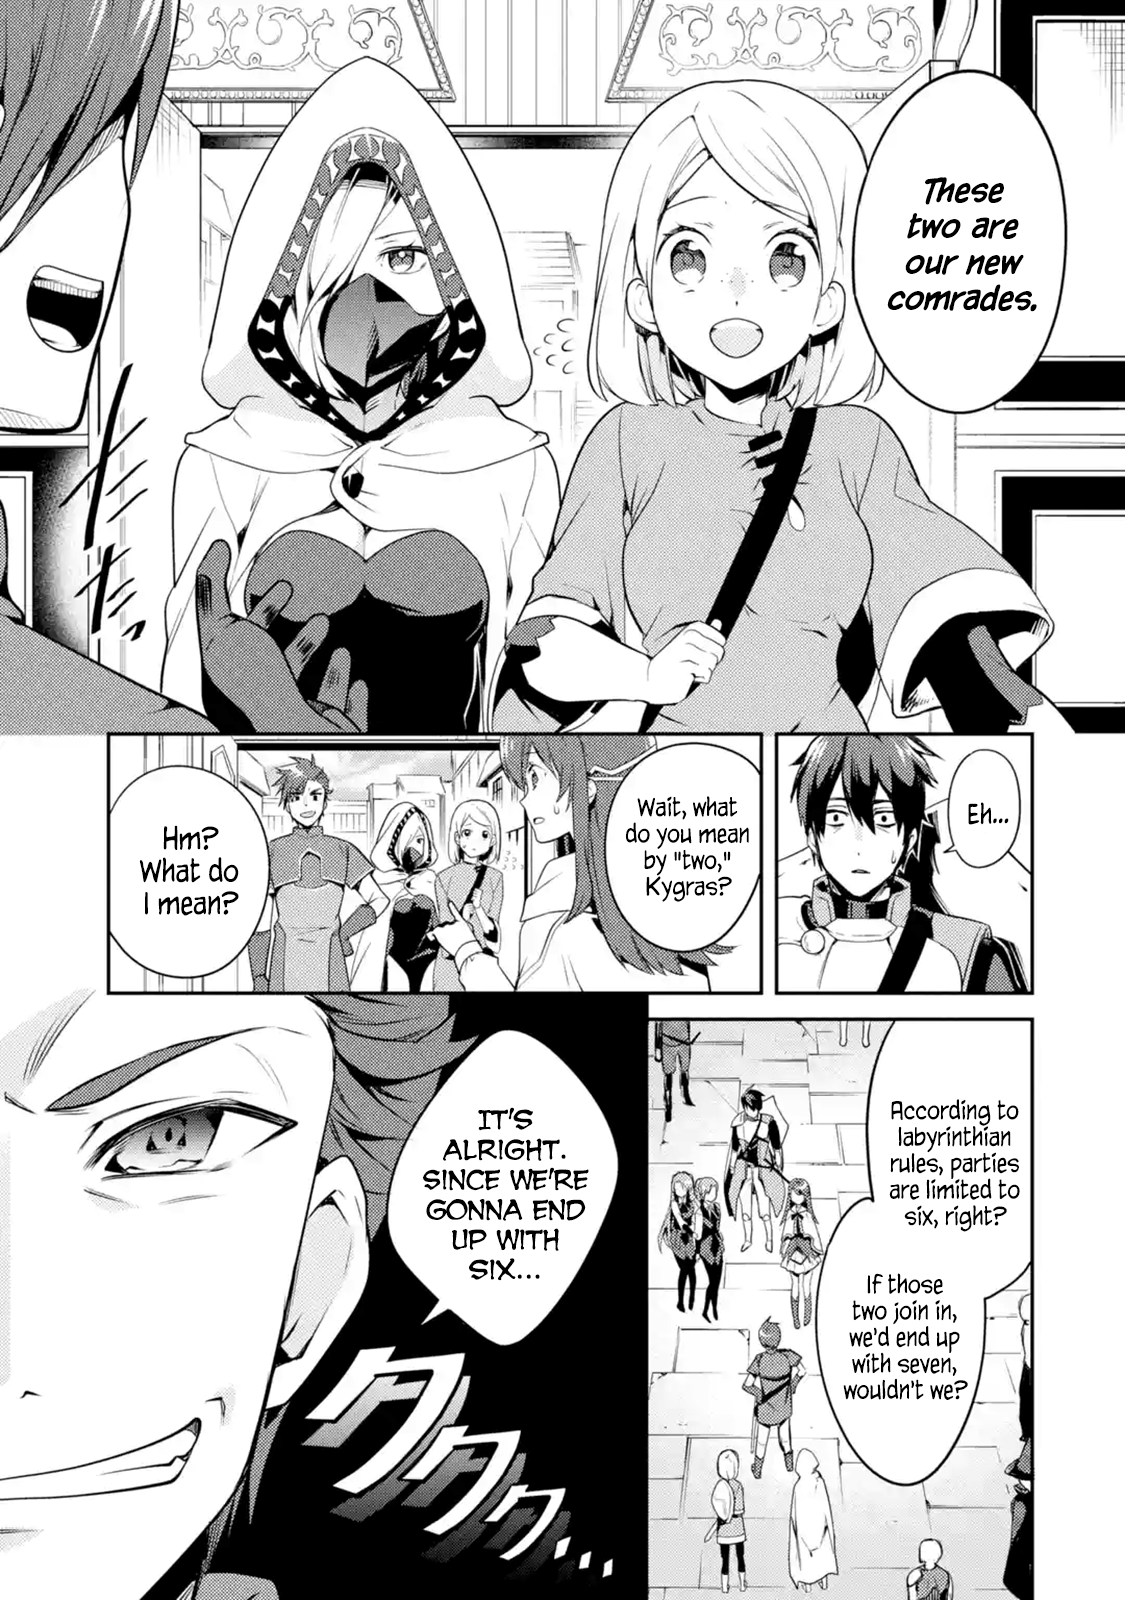 The Labyrinth Raids Of The Ultimate Tank ~The Tank Possessing A Rare 9,999 Endurance Skill Was Expelled From The Hero Party~ - Page 2